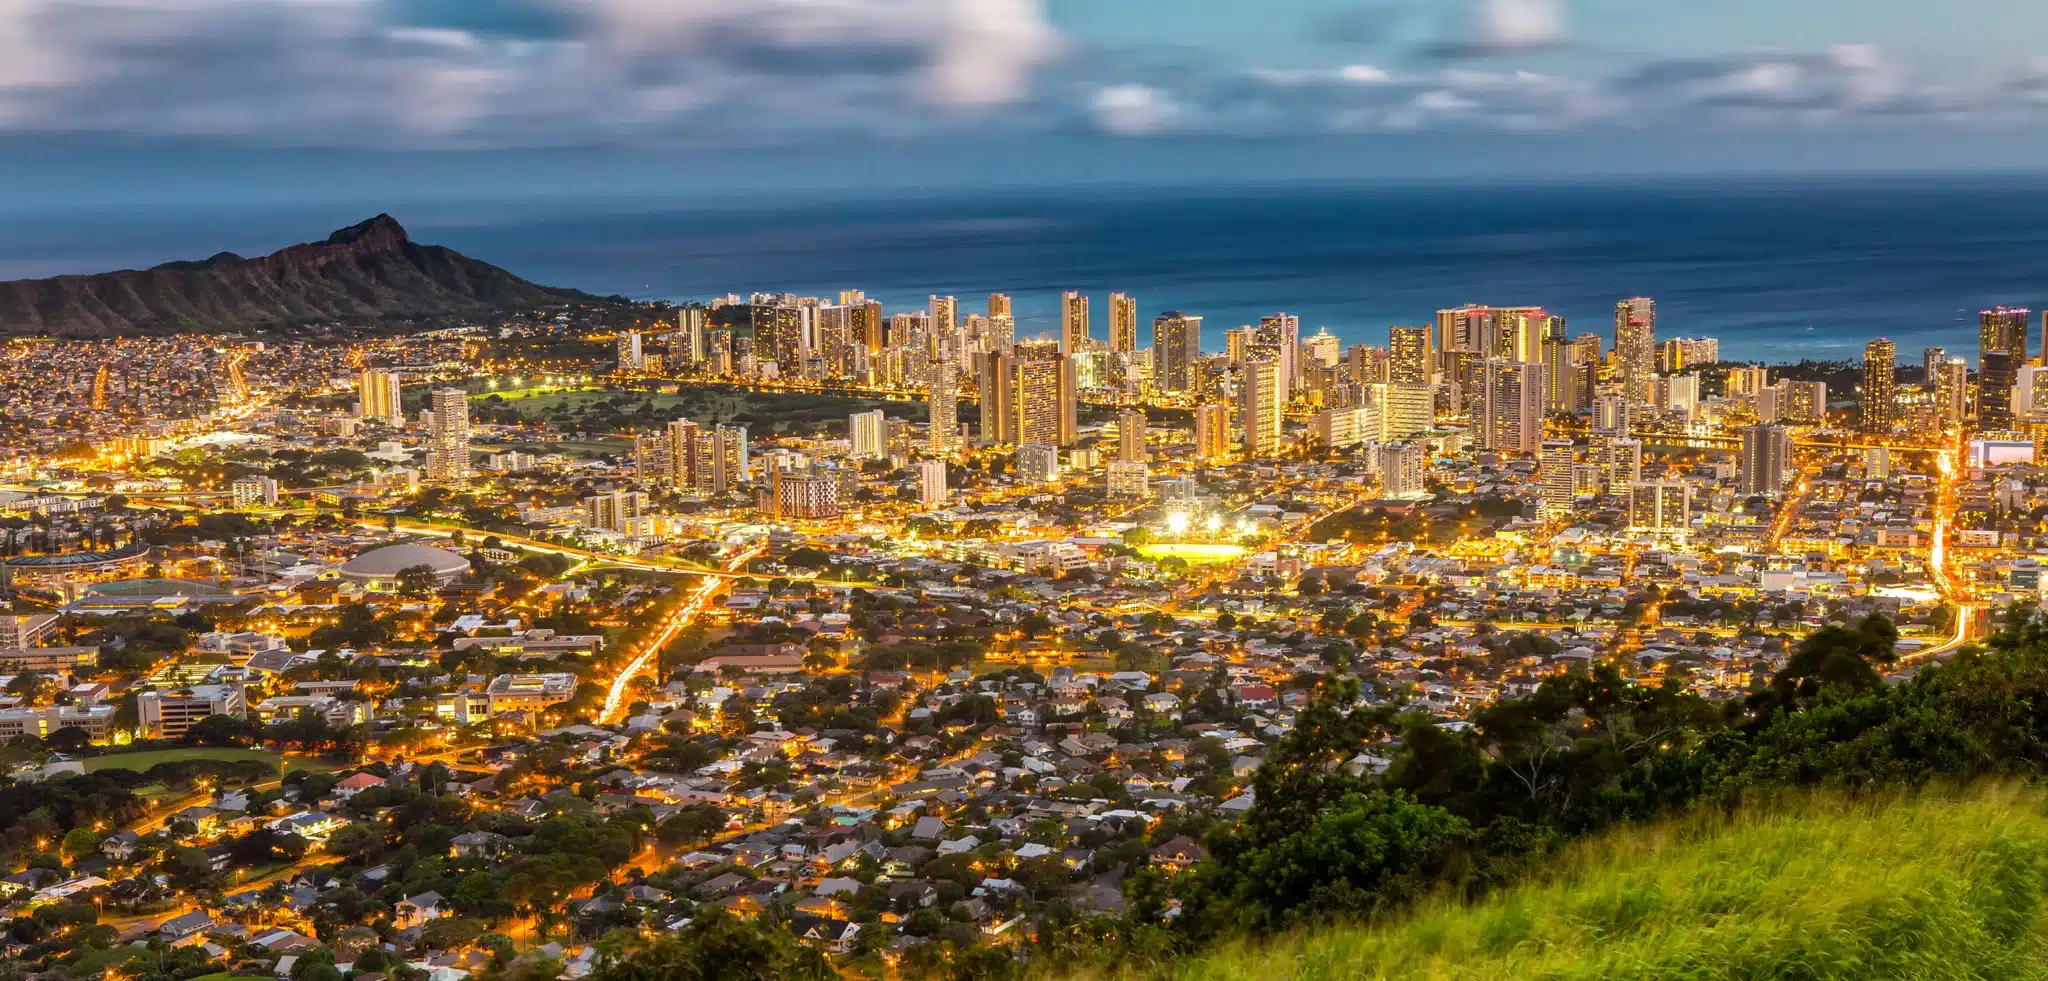 Fine Dining & Honolulu City Lights Tour is a Land Activity located in the city of Honolulu on Oahu, Hawaii